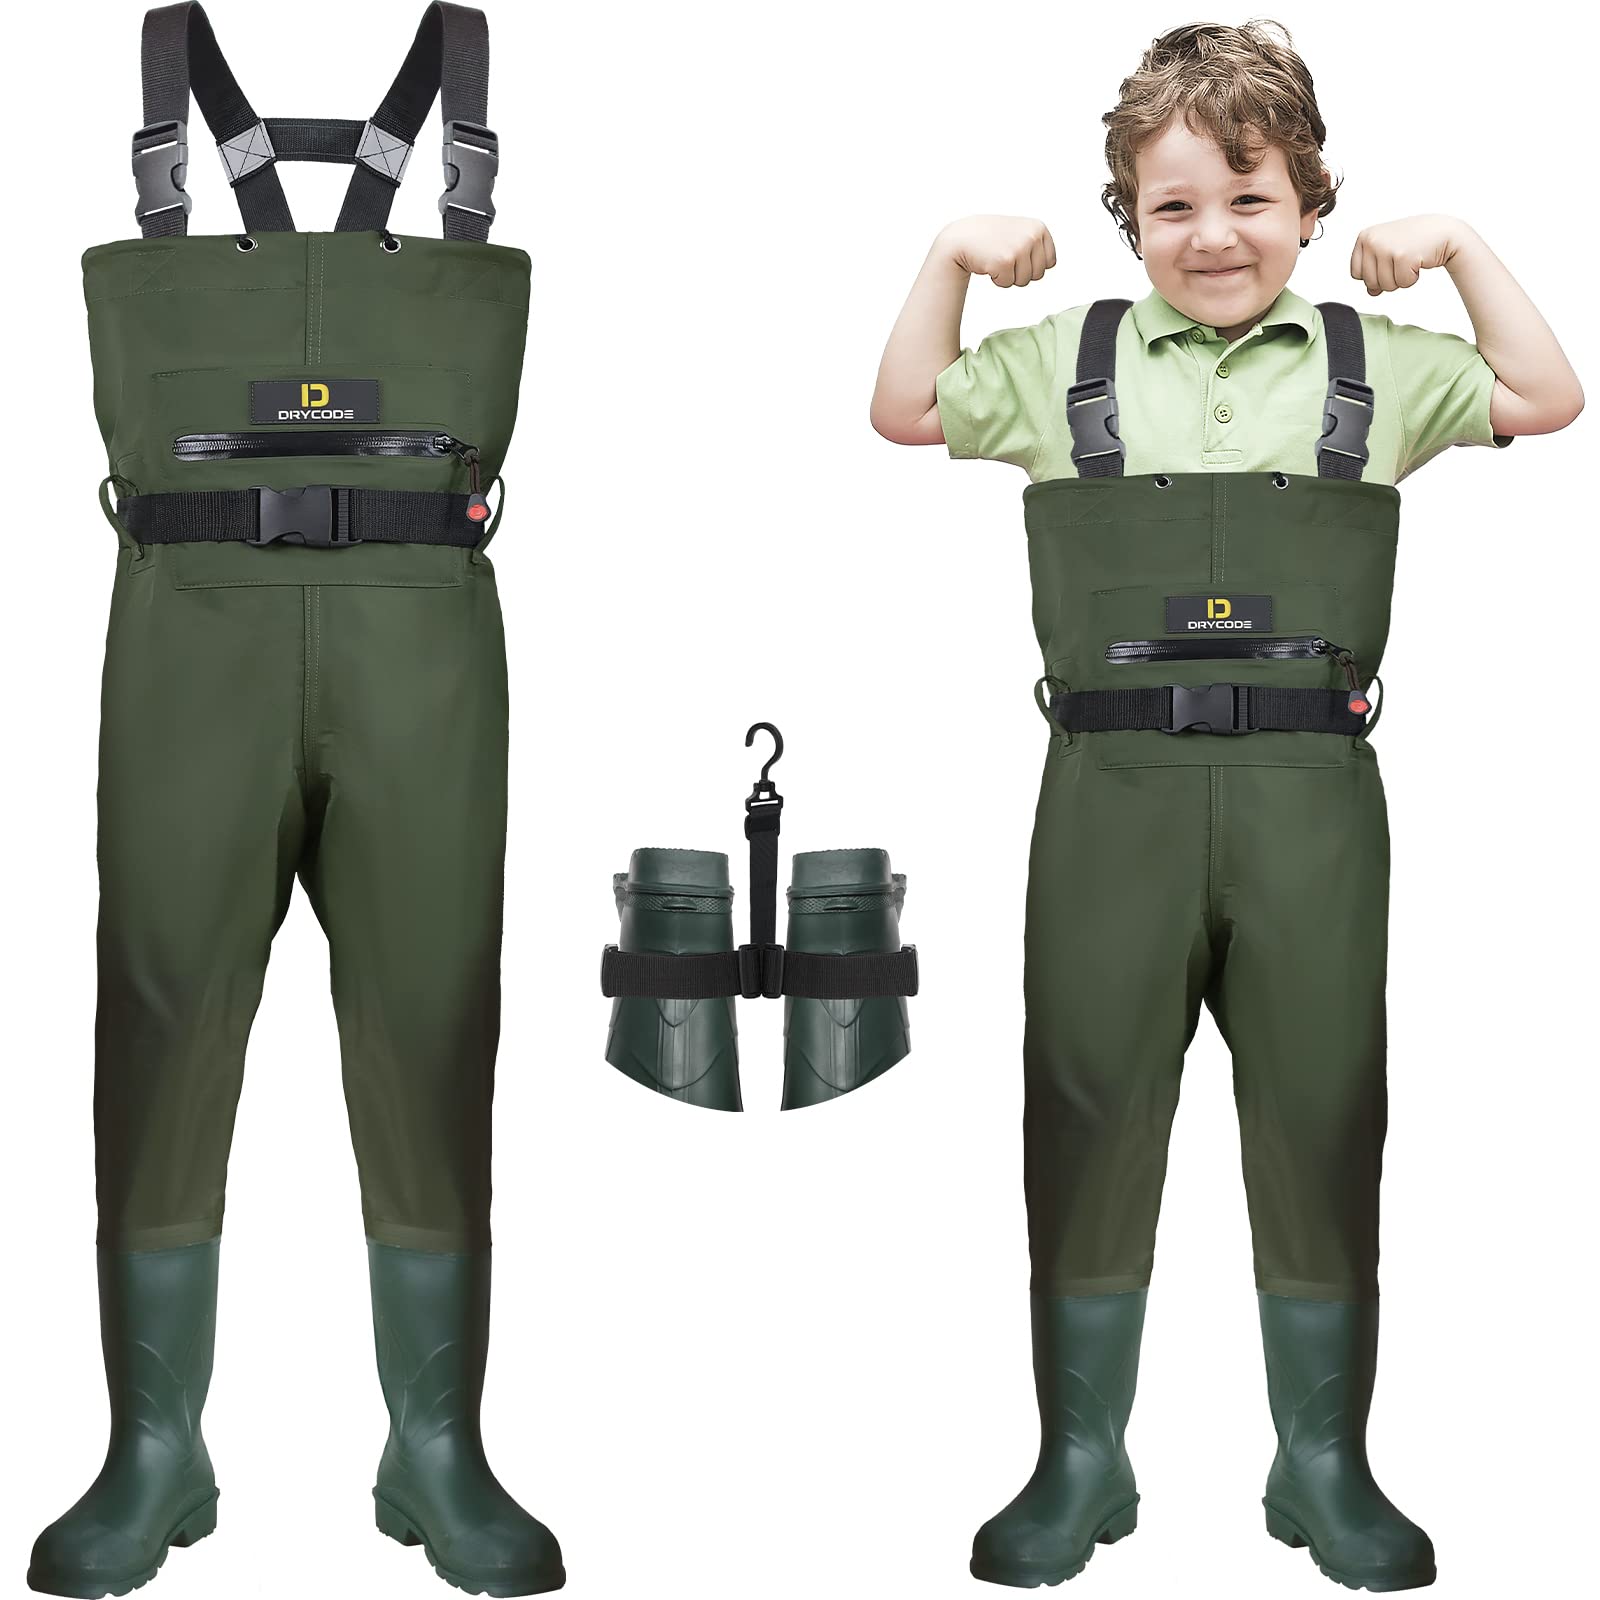 TideWe Chest Waders for Kids, Waterproof Youth Fishing Waders with